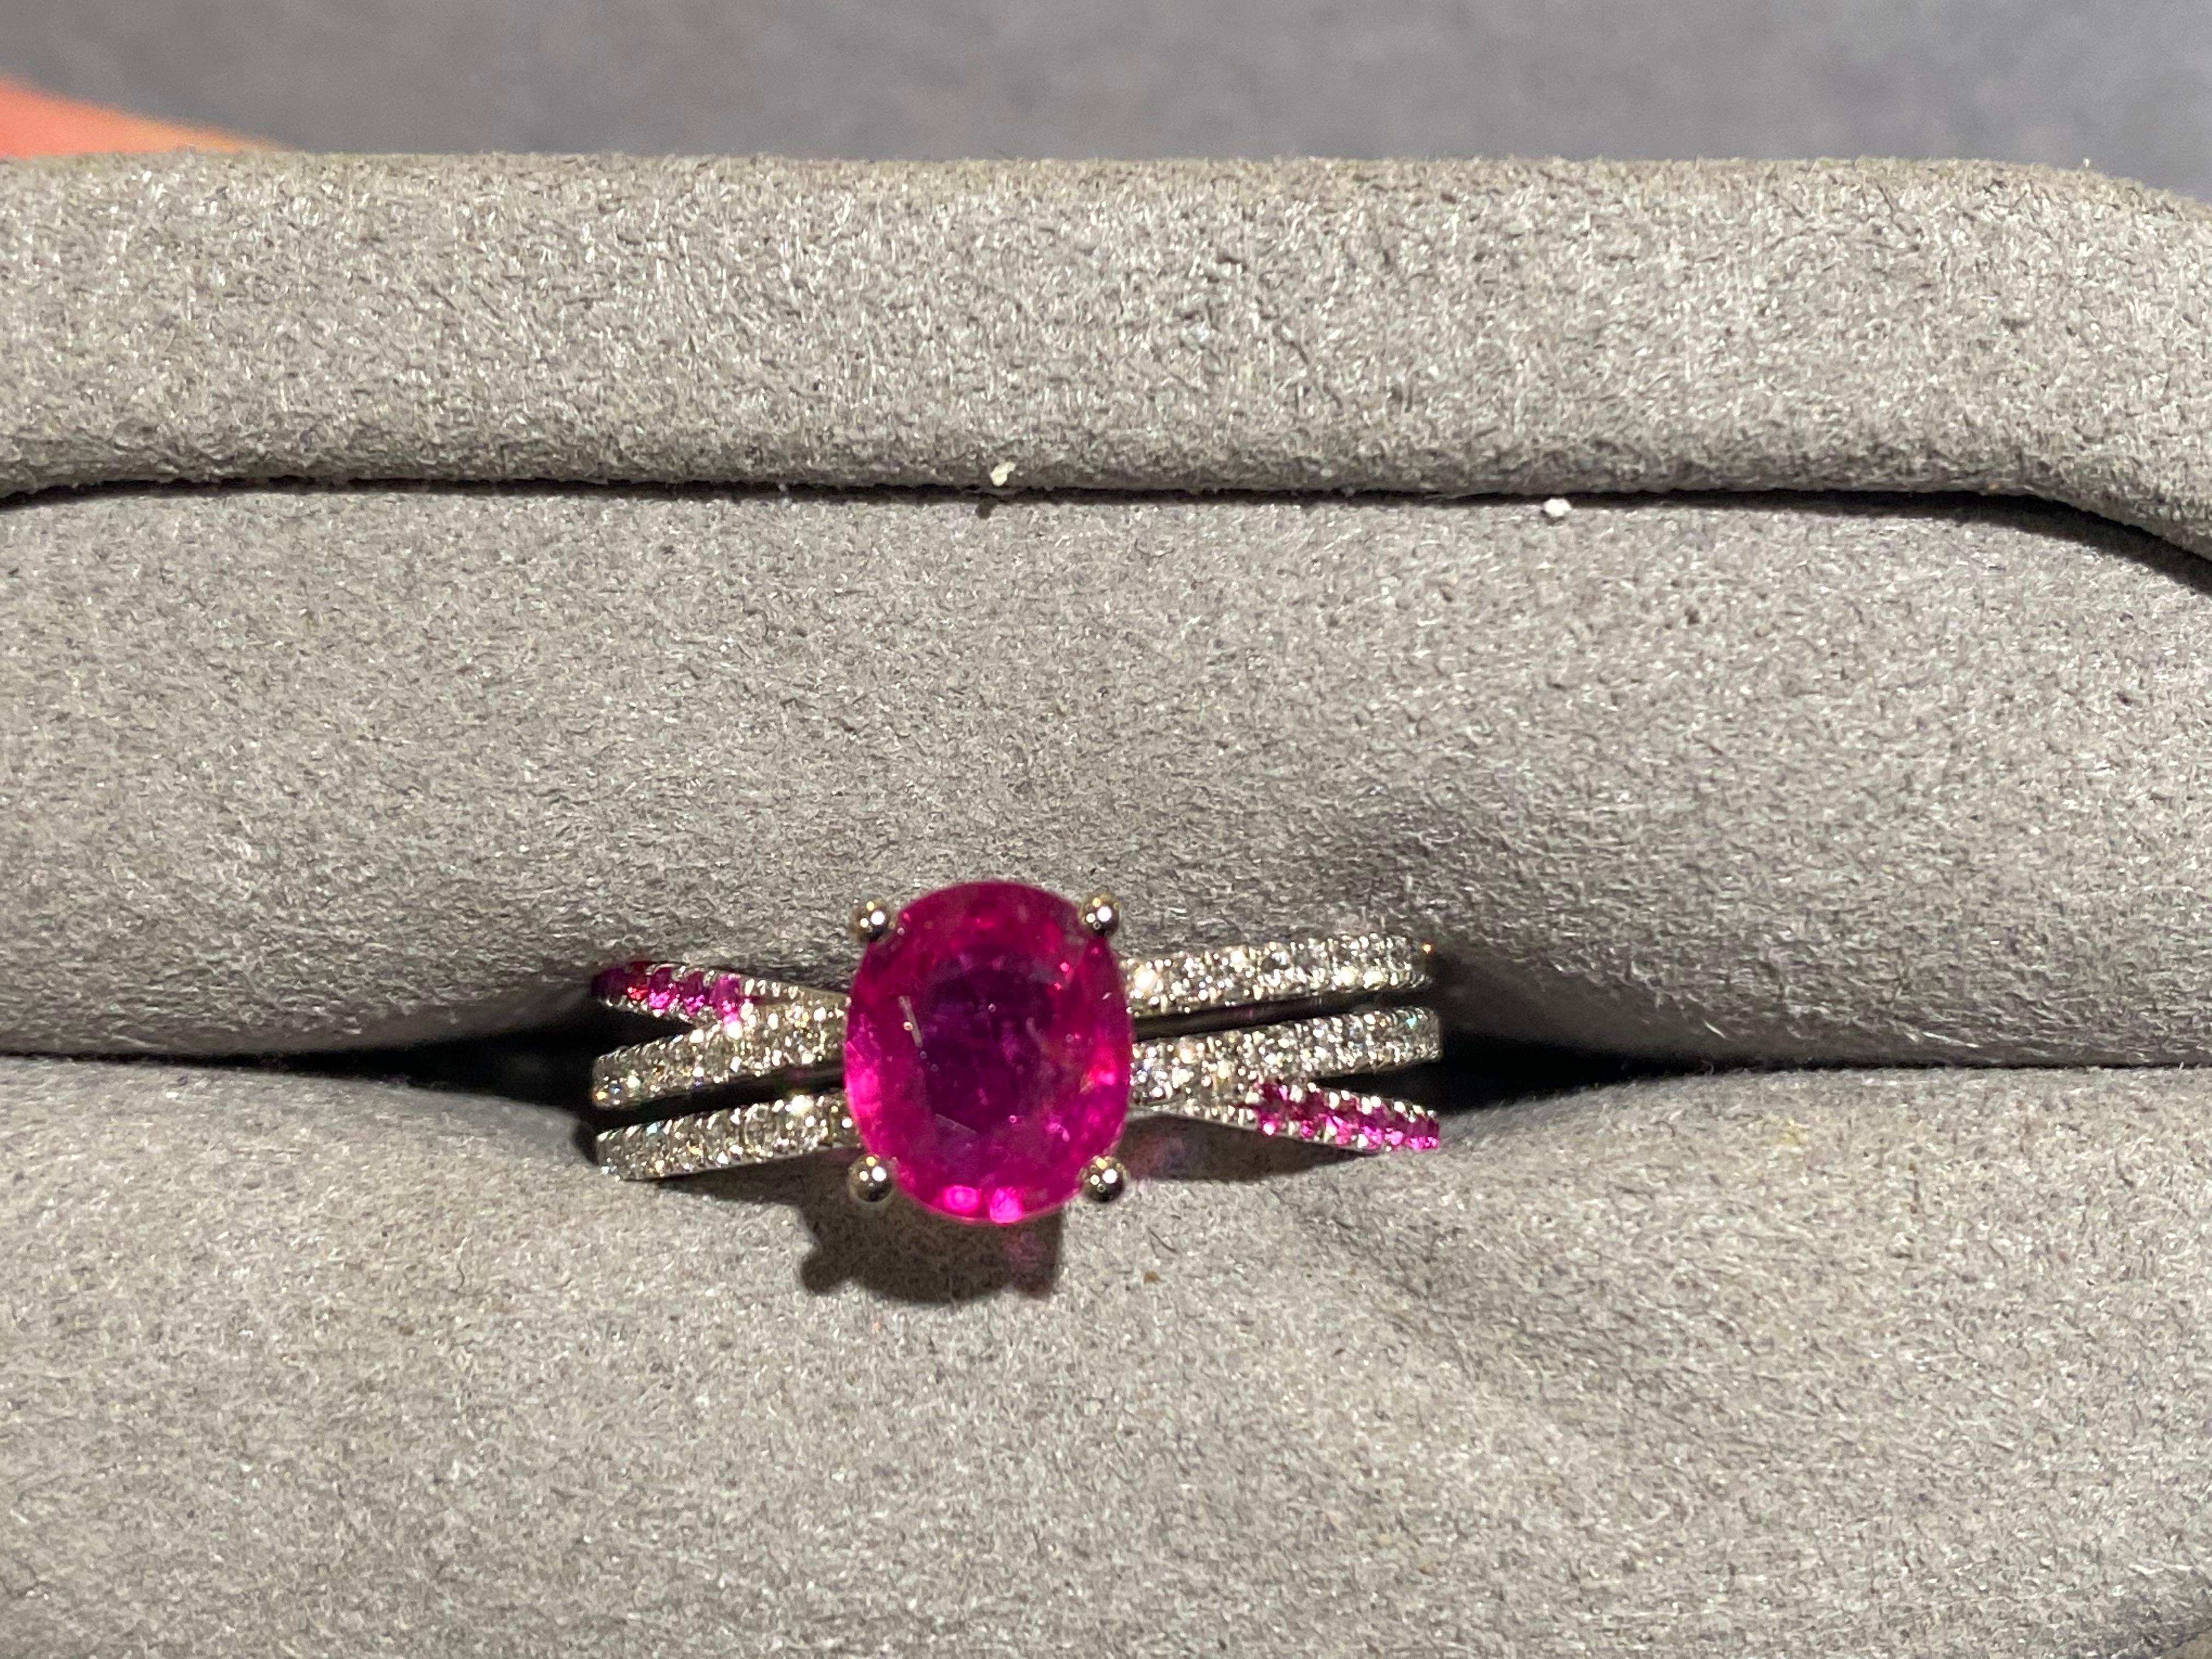 A 1.27 ct purplish pink sapphire and diamond ring in 18k white gold. The main purplish pink sapphire is secured by 4 white gold claws and the band of the ring is made up of 3 individual pave bands. The 2 diamond pave bends are parallel to each other